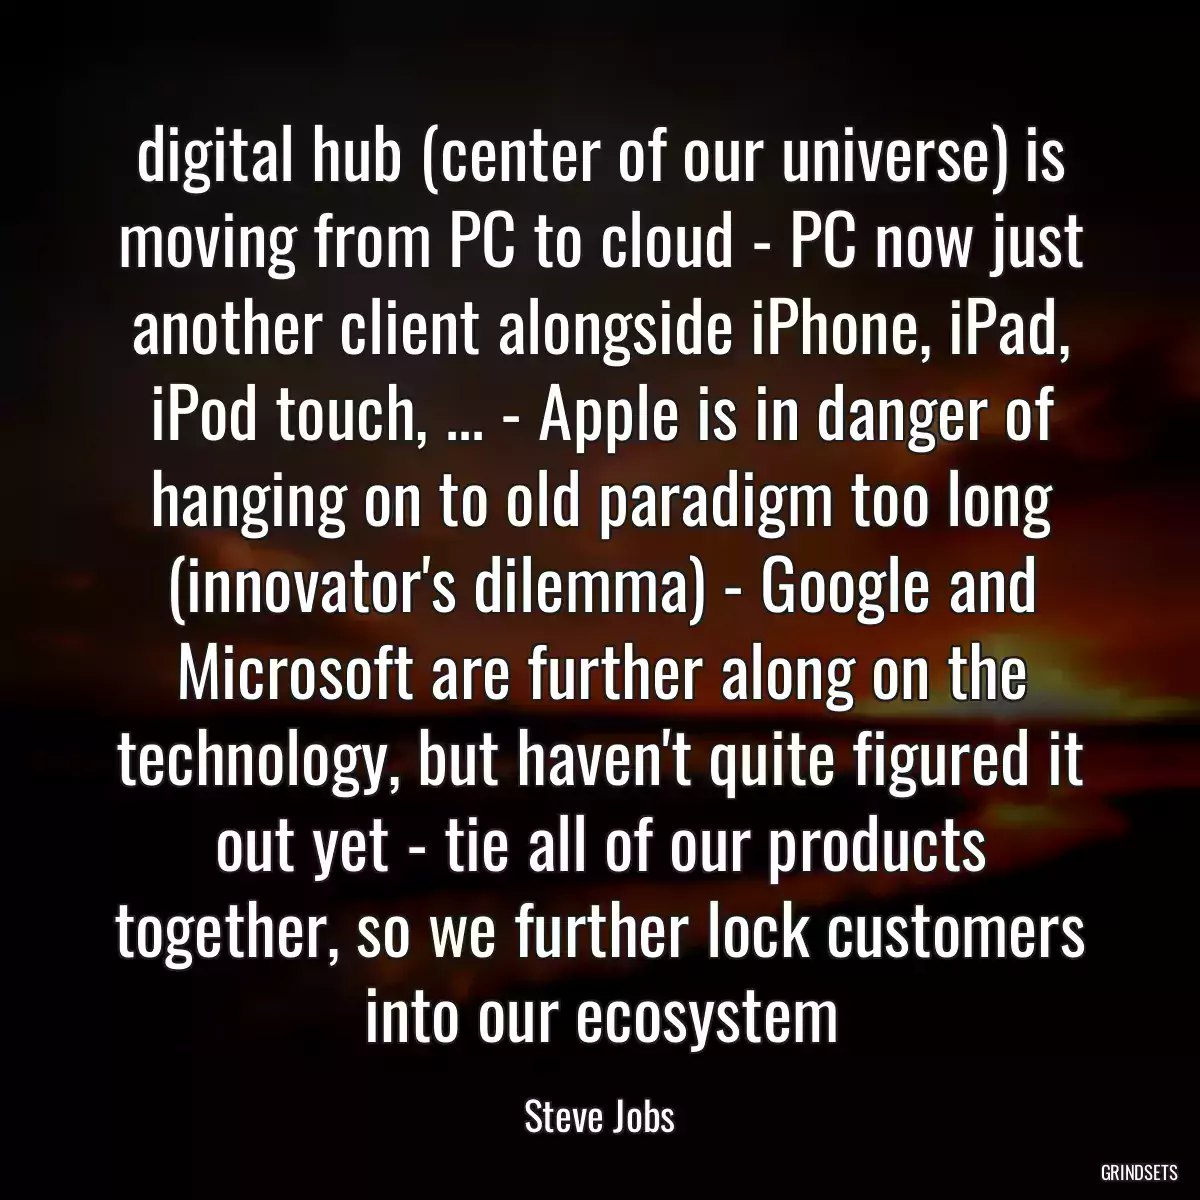 digital hub (center of our universe) is moving from PC to cloud - PC now just another client alongside iPhone, iPad, iPod touch, ... - Apple is in danger of hanging on to old paradigm too long (innovator\'s dilemma) - Google and Microsoft are further along on the technology, but haven\'t quite figured it out yet - tie all of our products together, so we further lock customers into our ecosystem